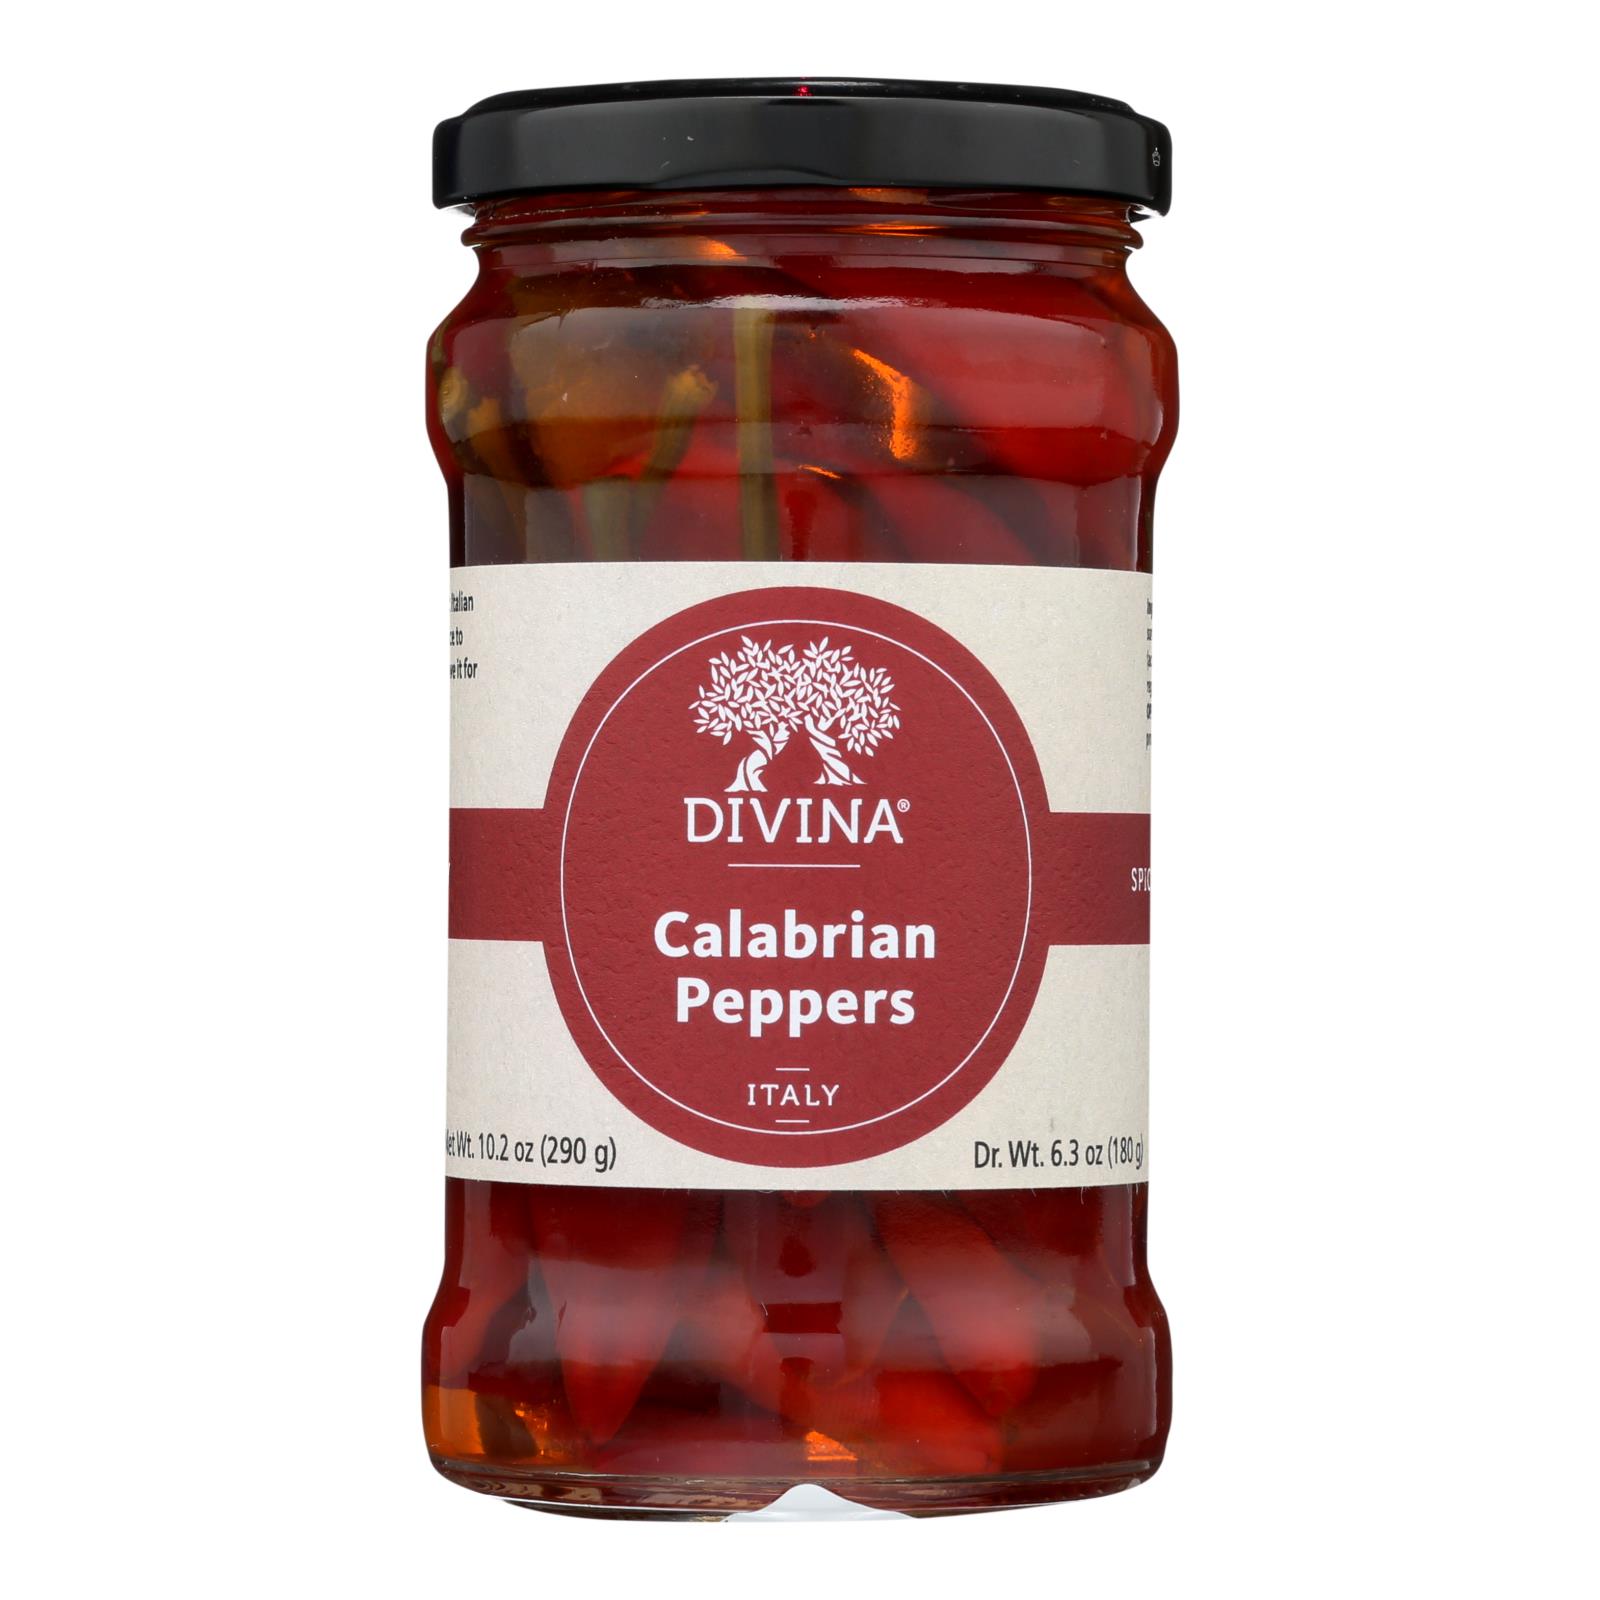 Divina - Peppers Calabrian - 6개 묶음상품 - 9.2 OZ